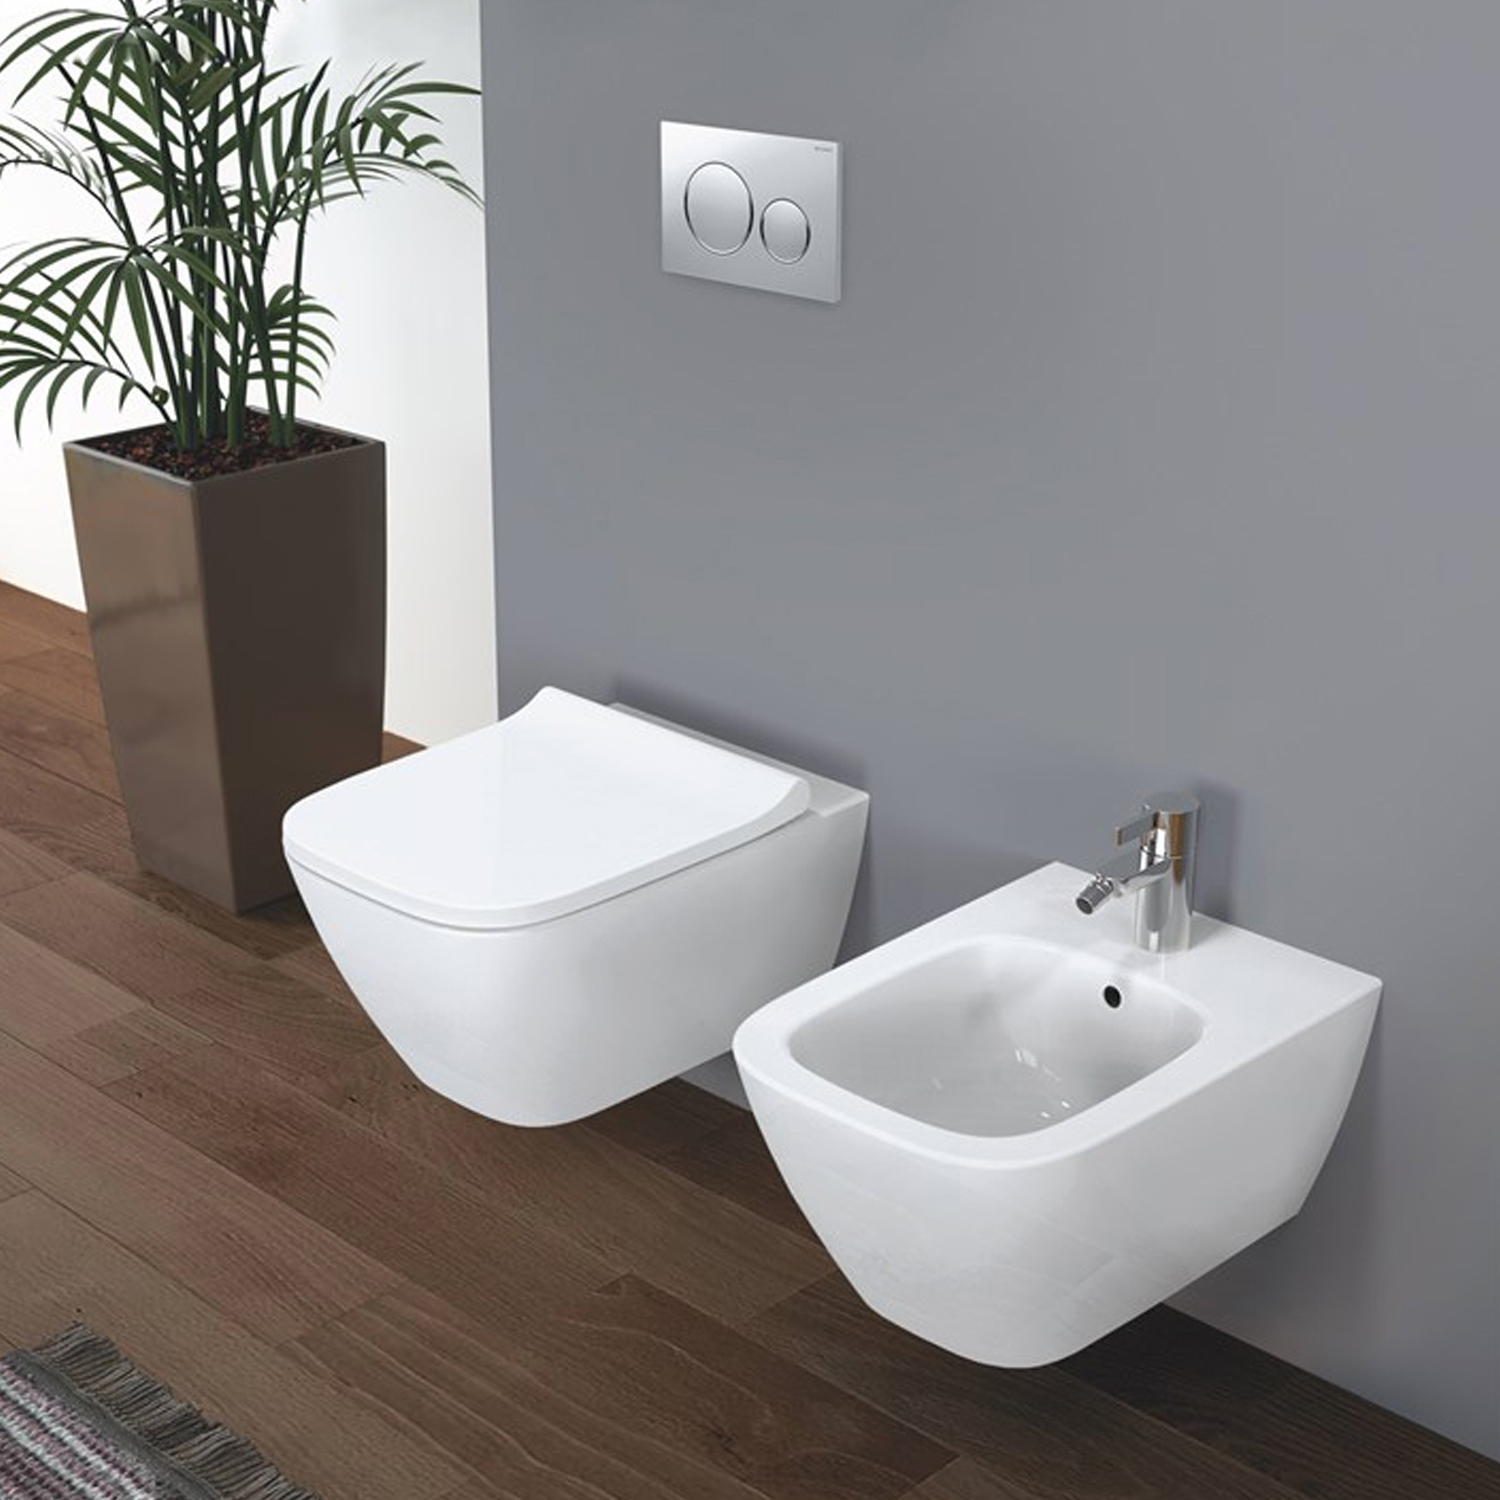 Suspended sanitary ware without rim with traditional seat Smyle Geberit  model 54x35 cm